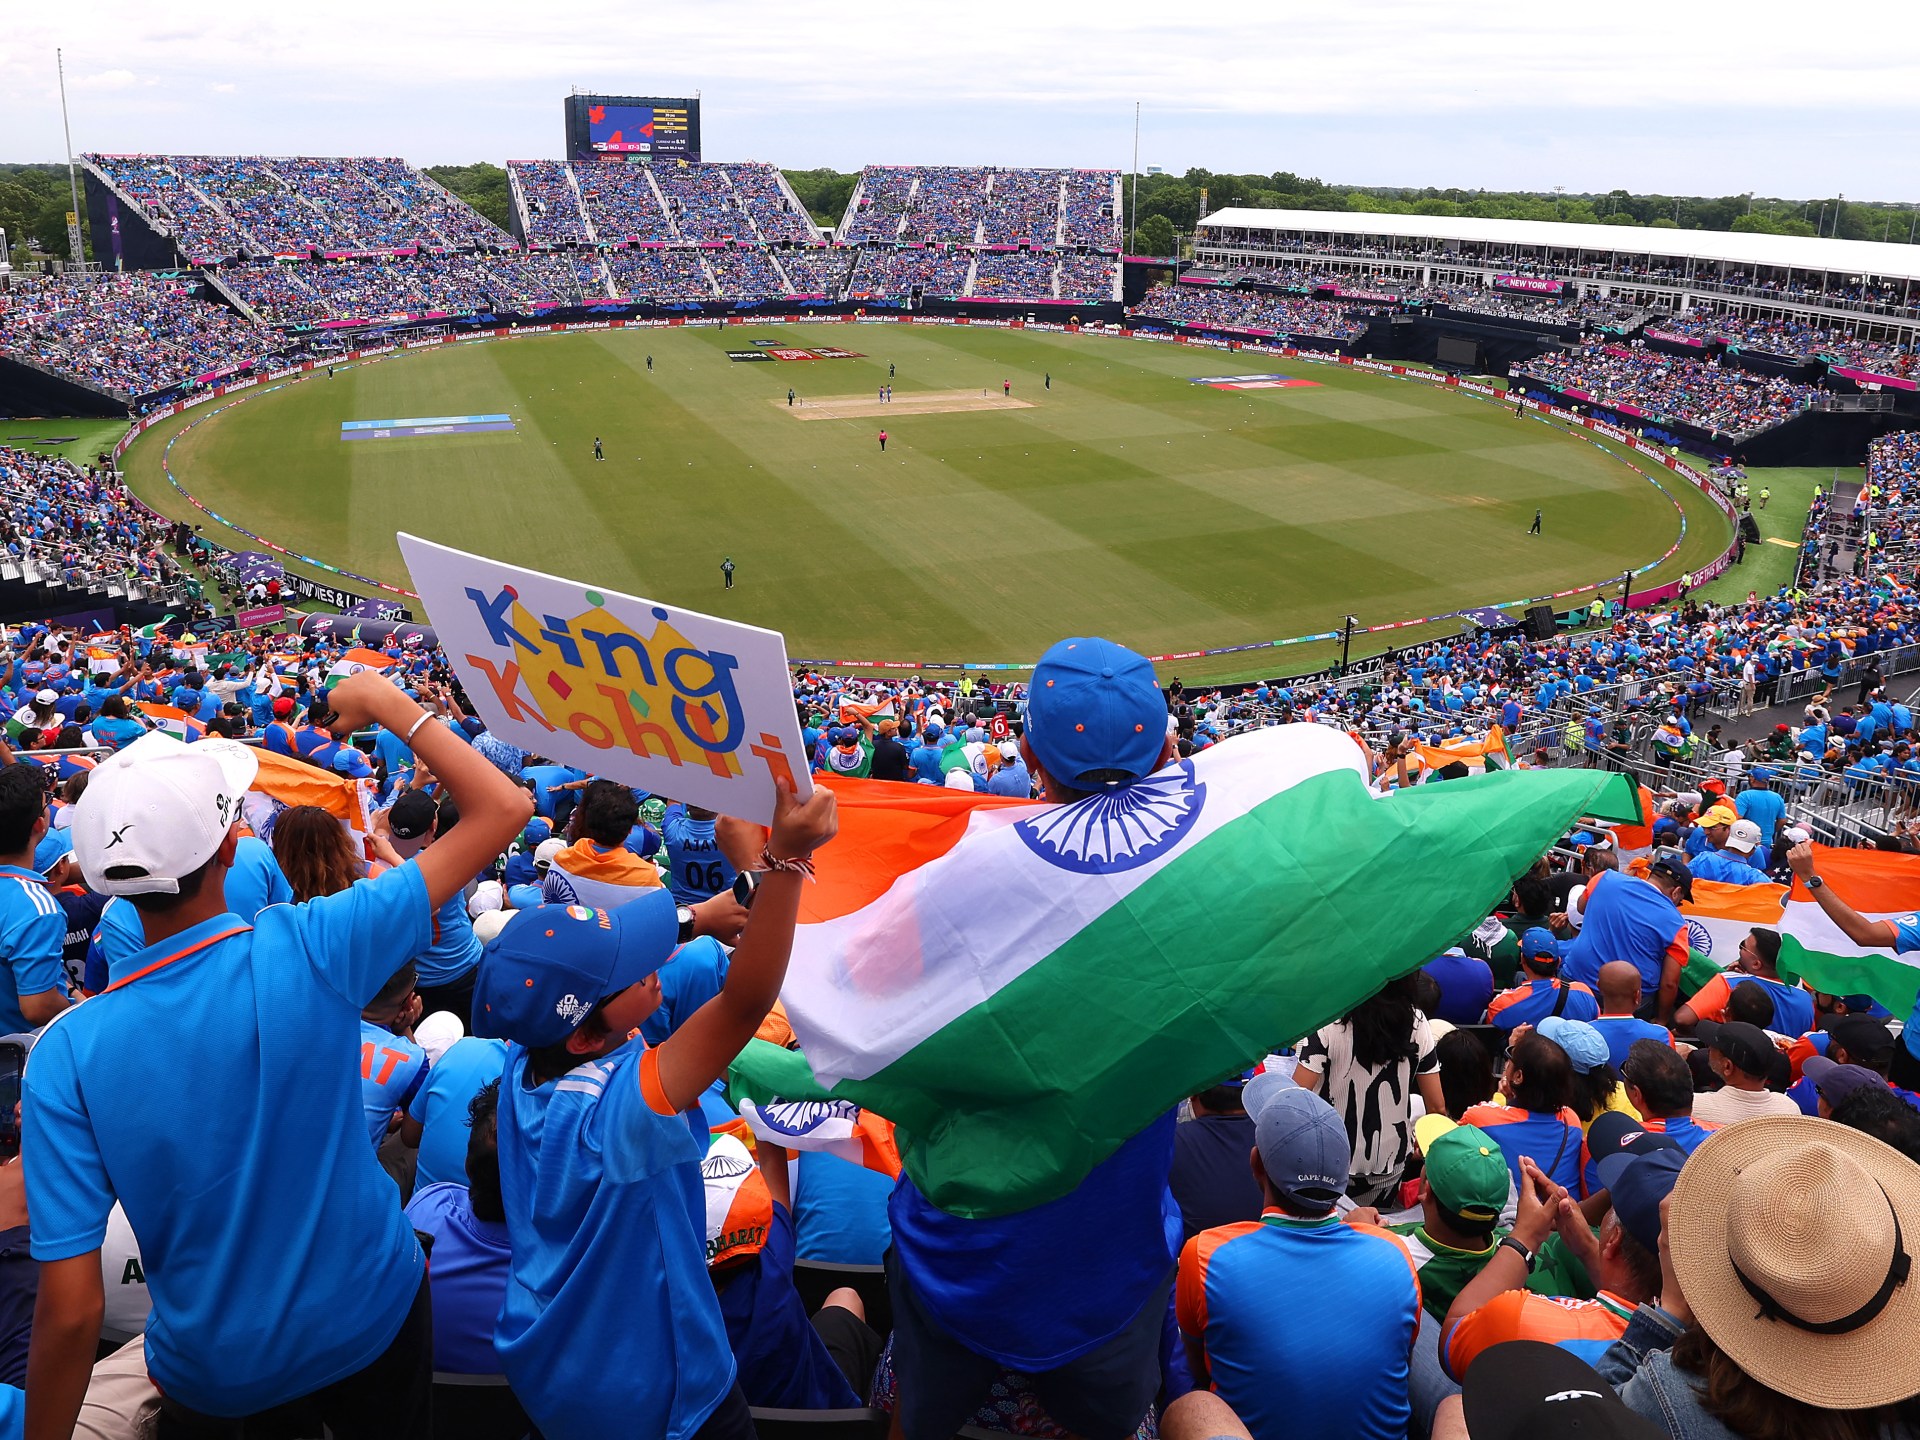 USA vs India: How the home team could help convert Americans to cricket